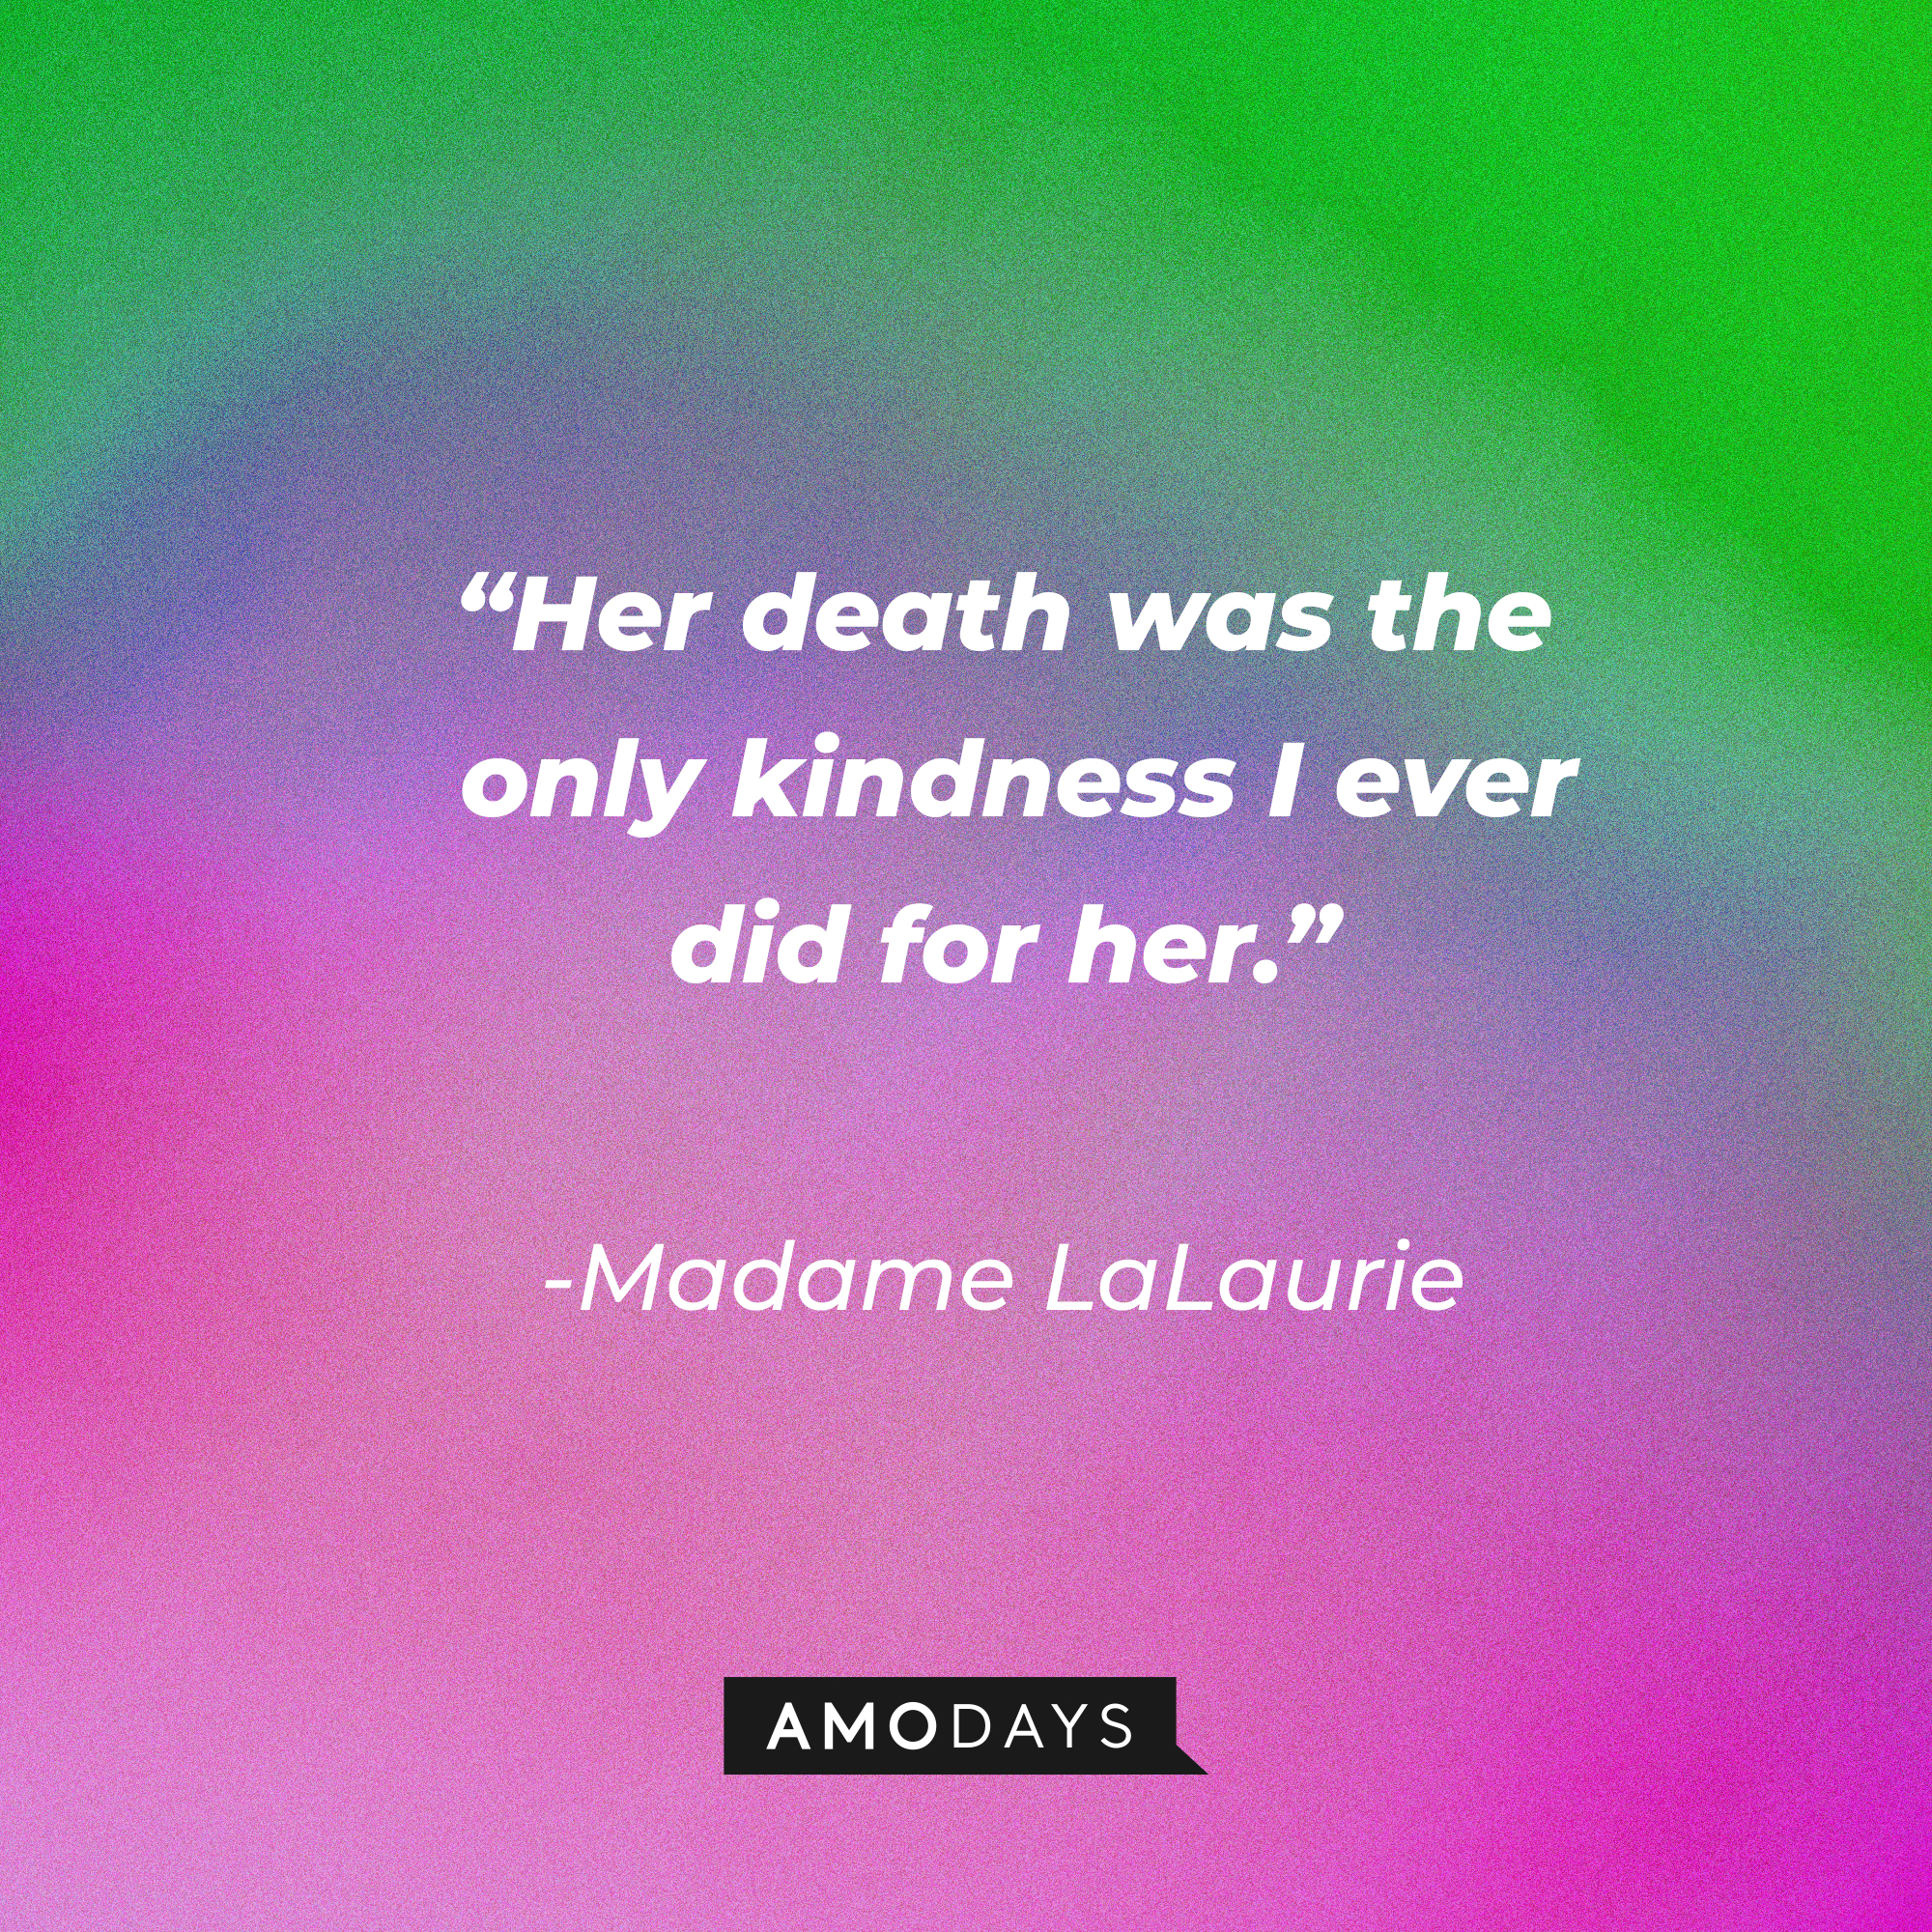 Madame LaLaurie’s quote: “Her death was the only kindness I ever did for her.”  | Source: AmoDays